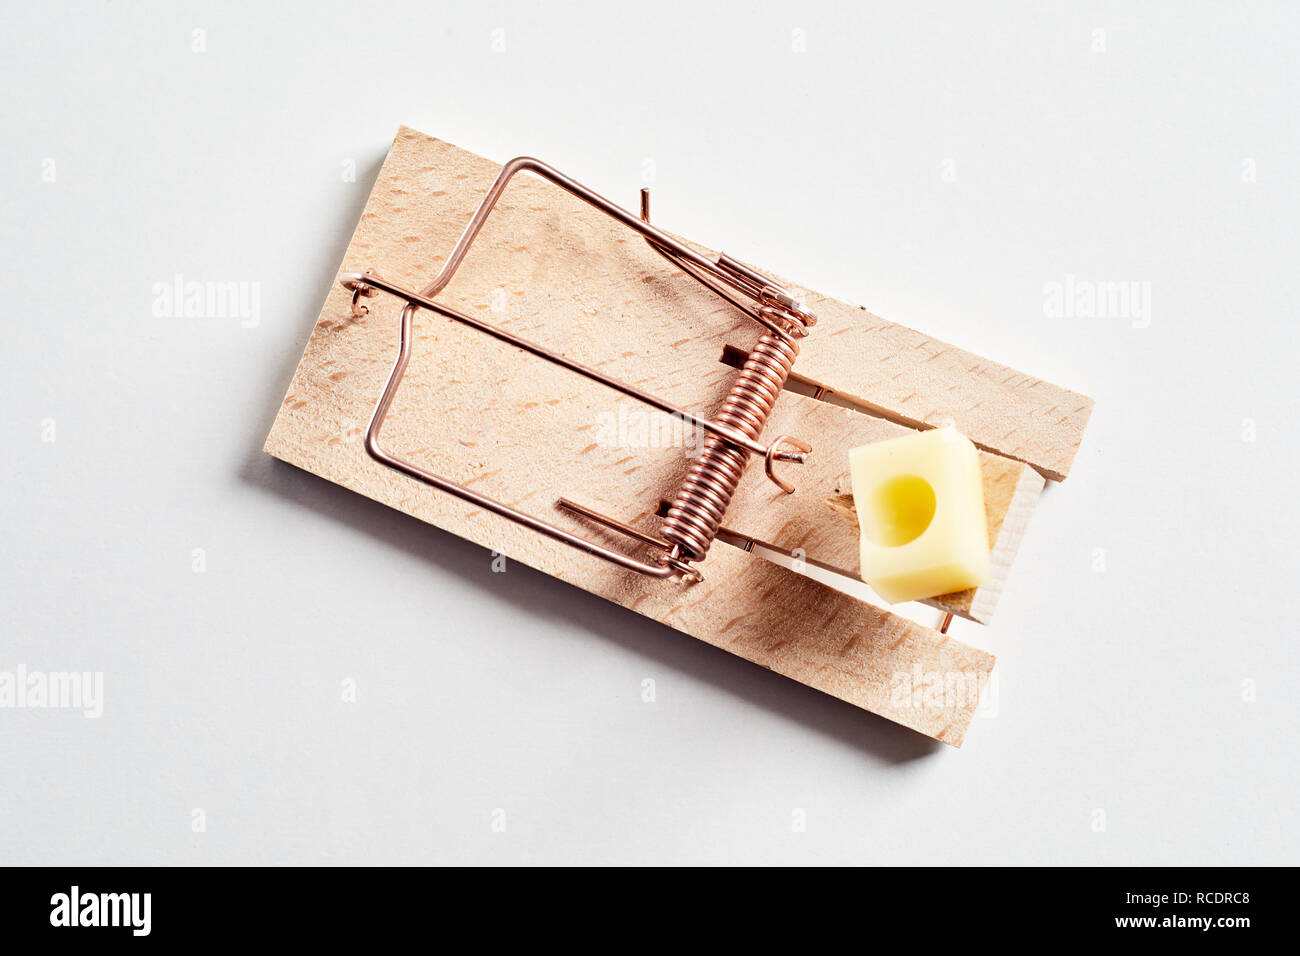 Wooden Closeup Mouse Trap On A White Background Stock Photo